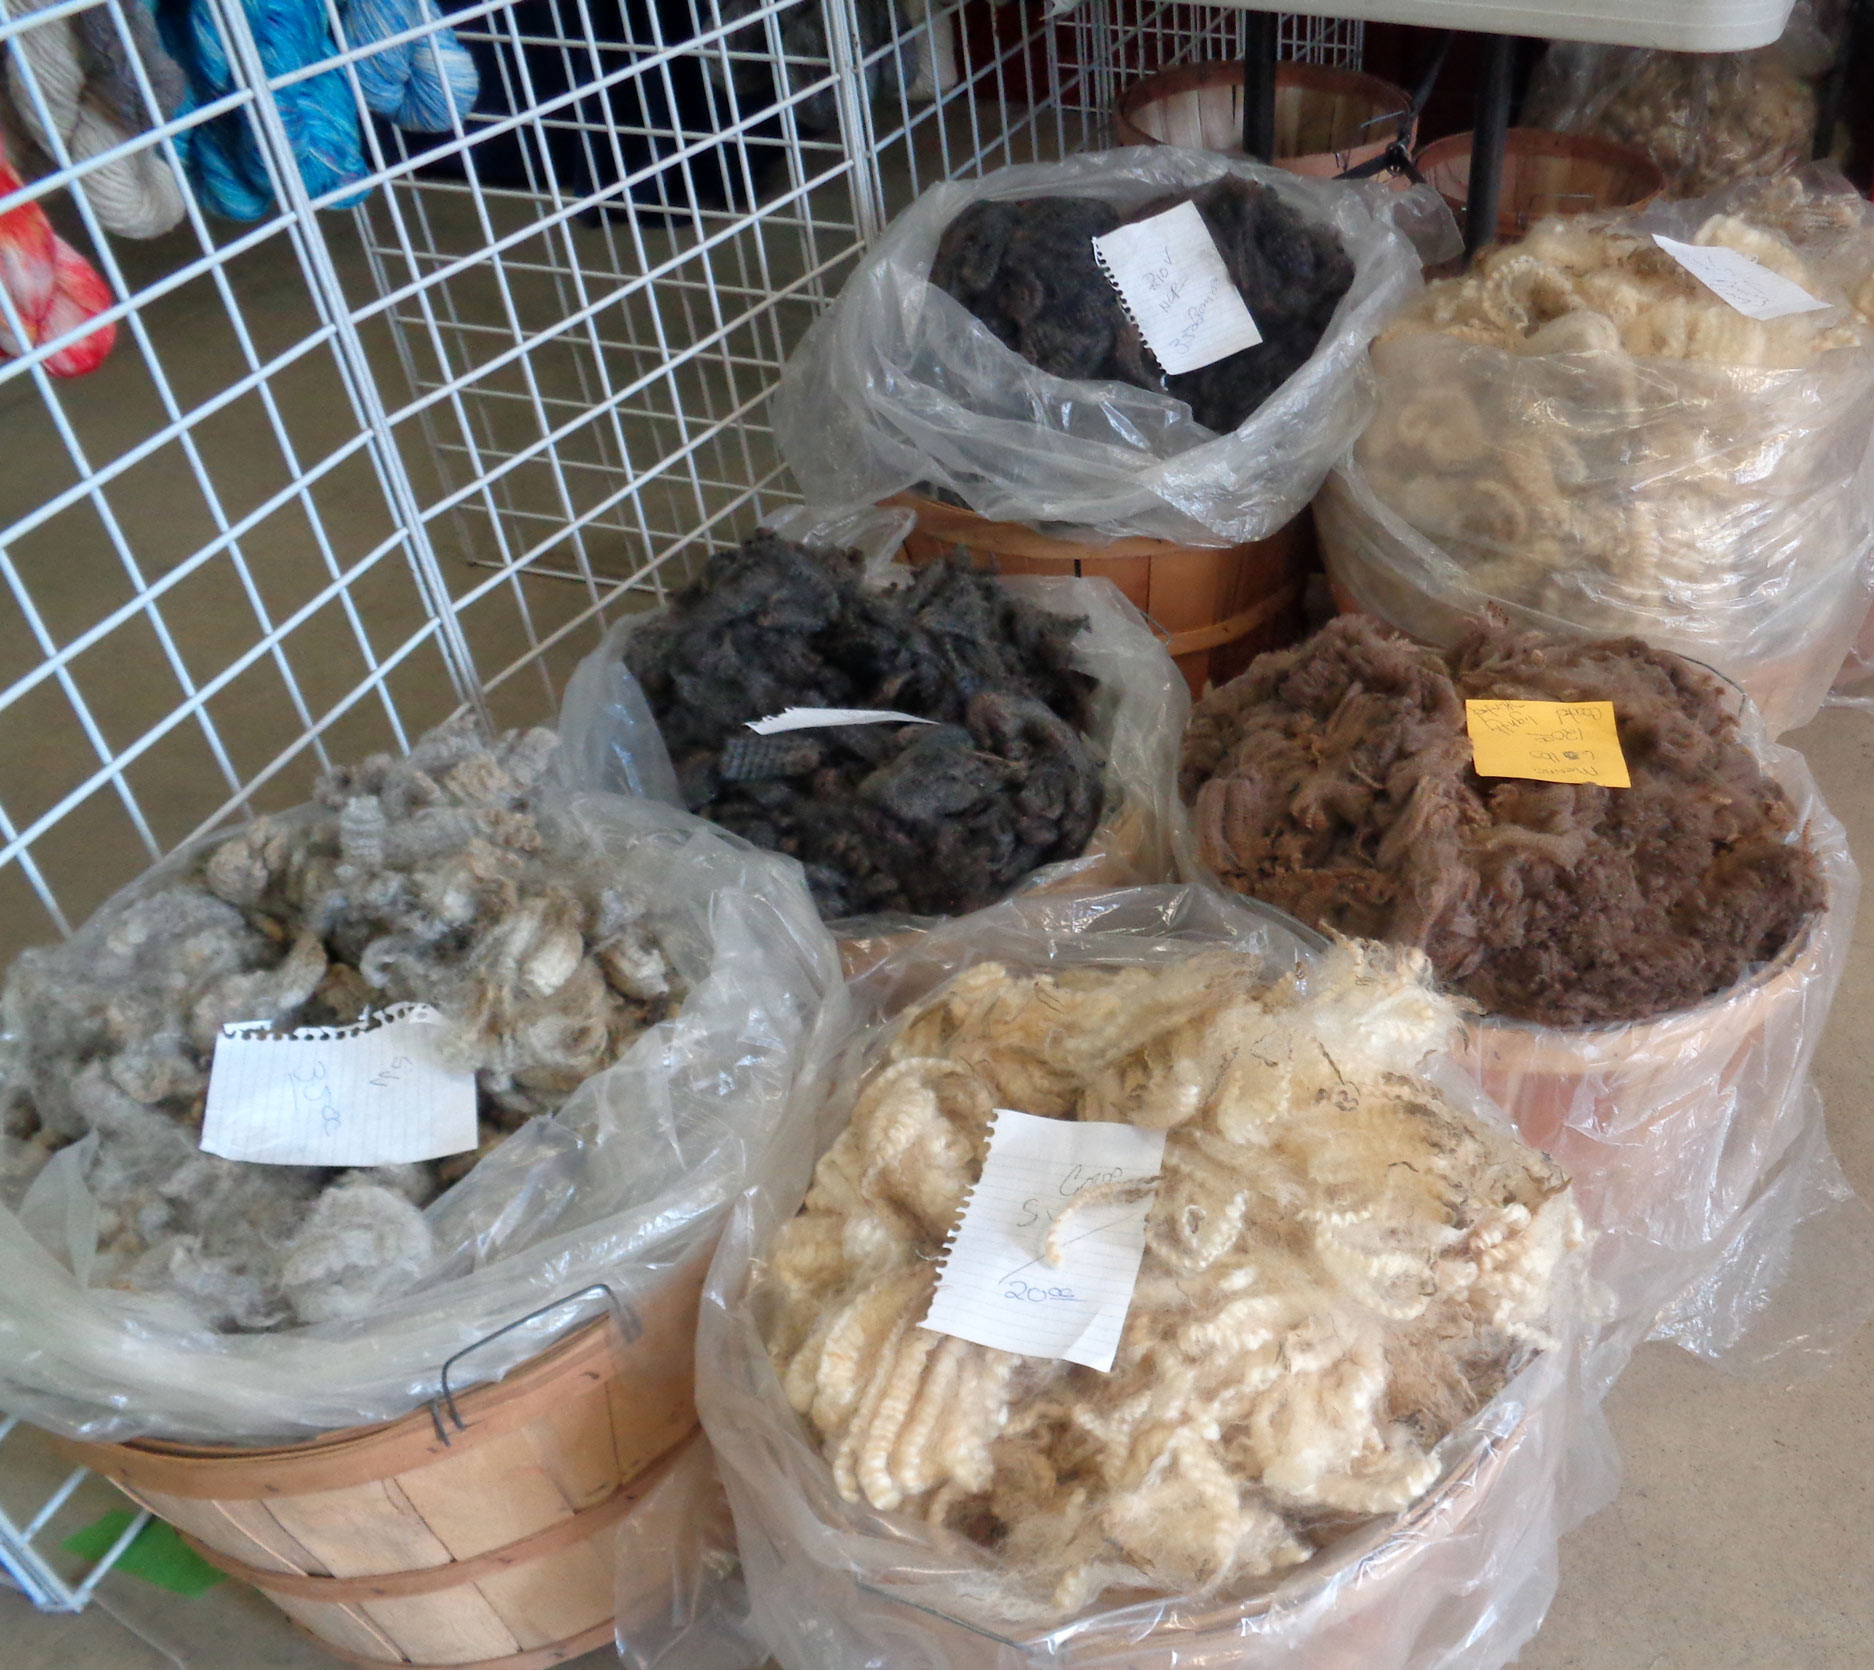 baskets of wool on display in vendor booth of fiber event